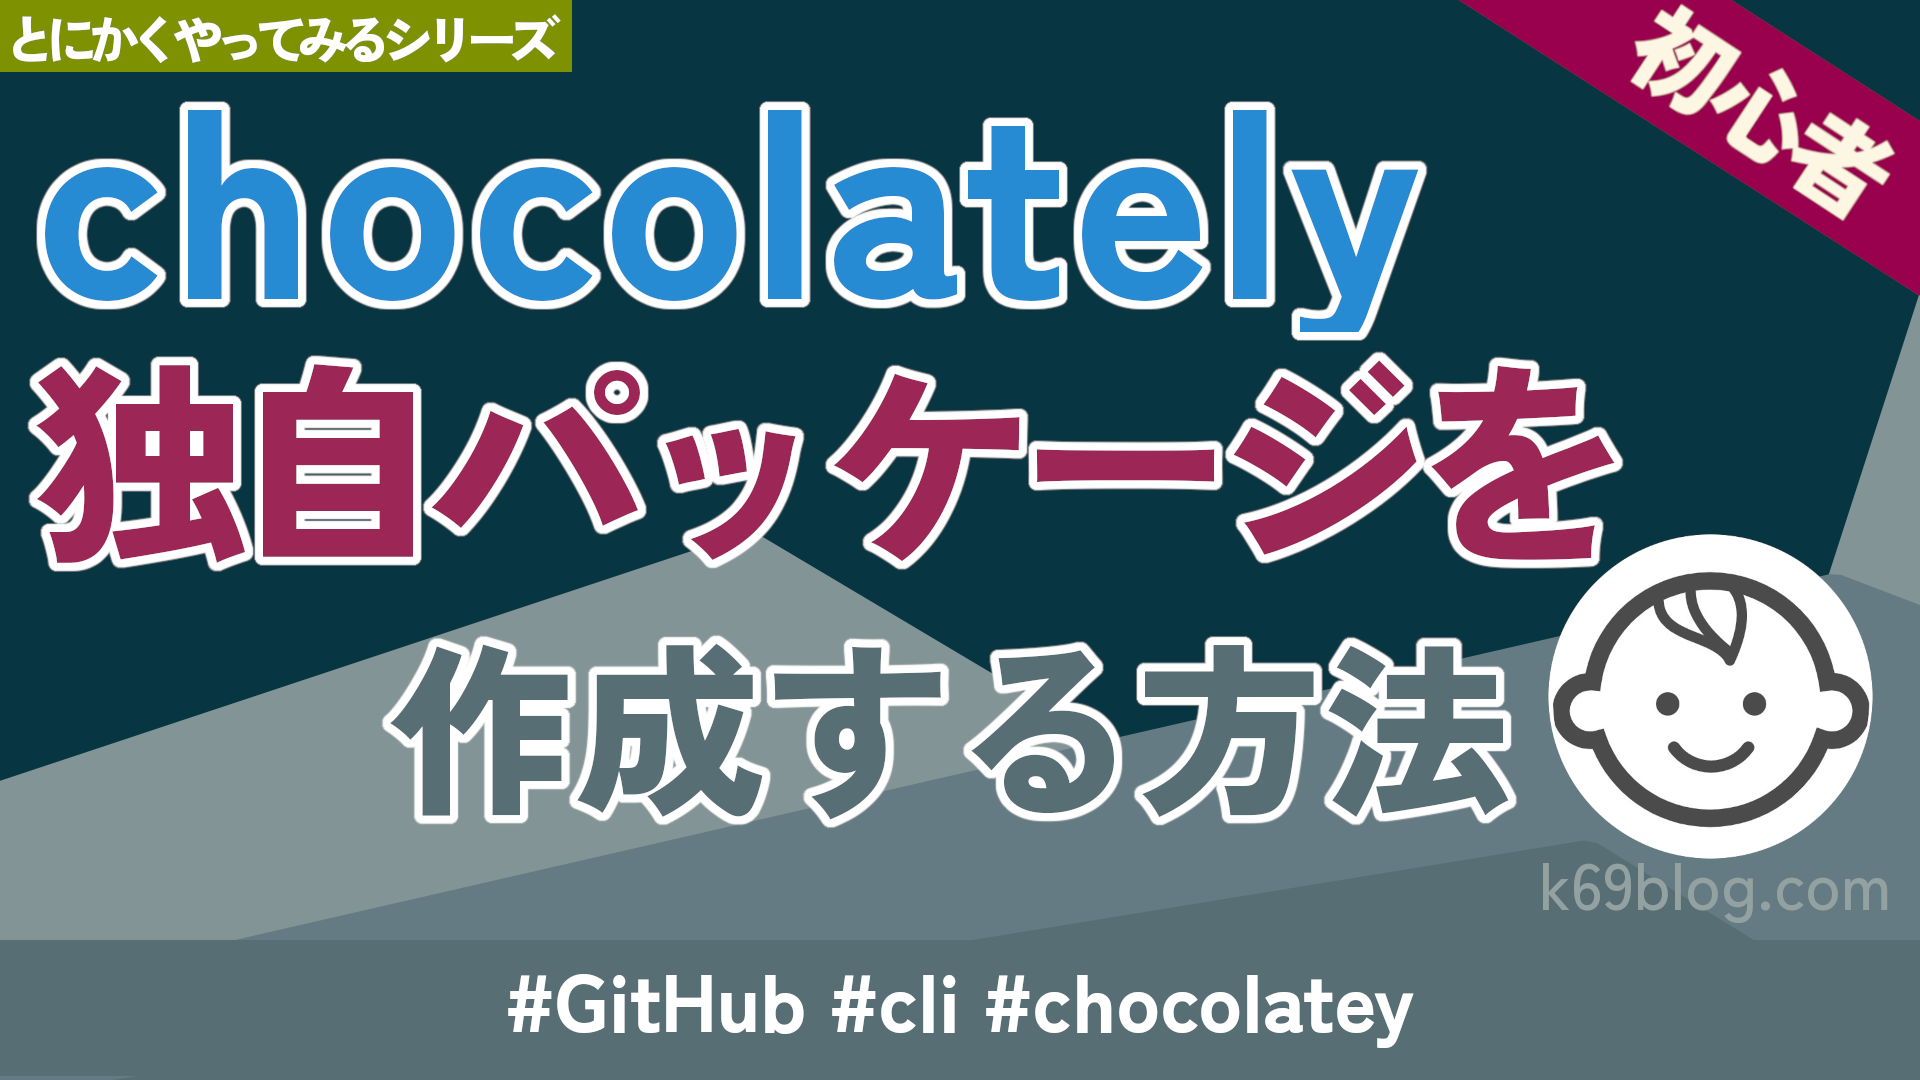 Cover Image for chocolately独自パッケージを作成する方法